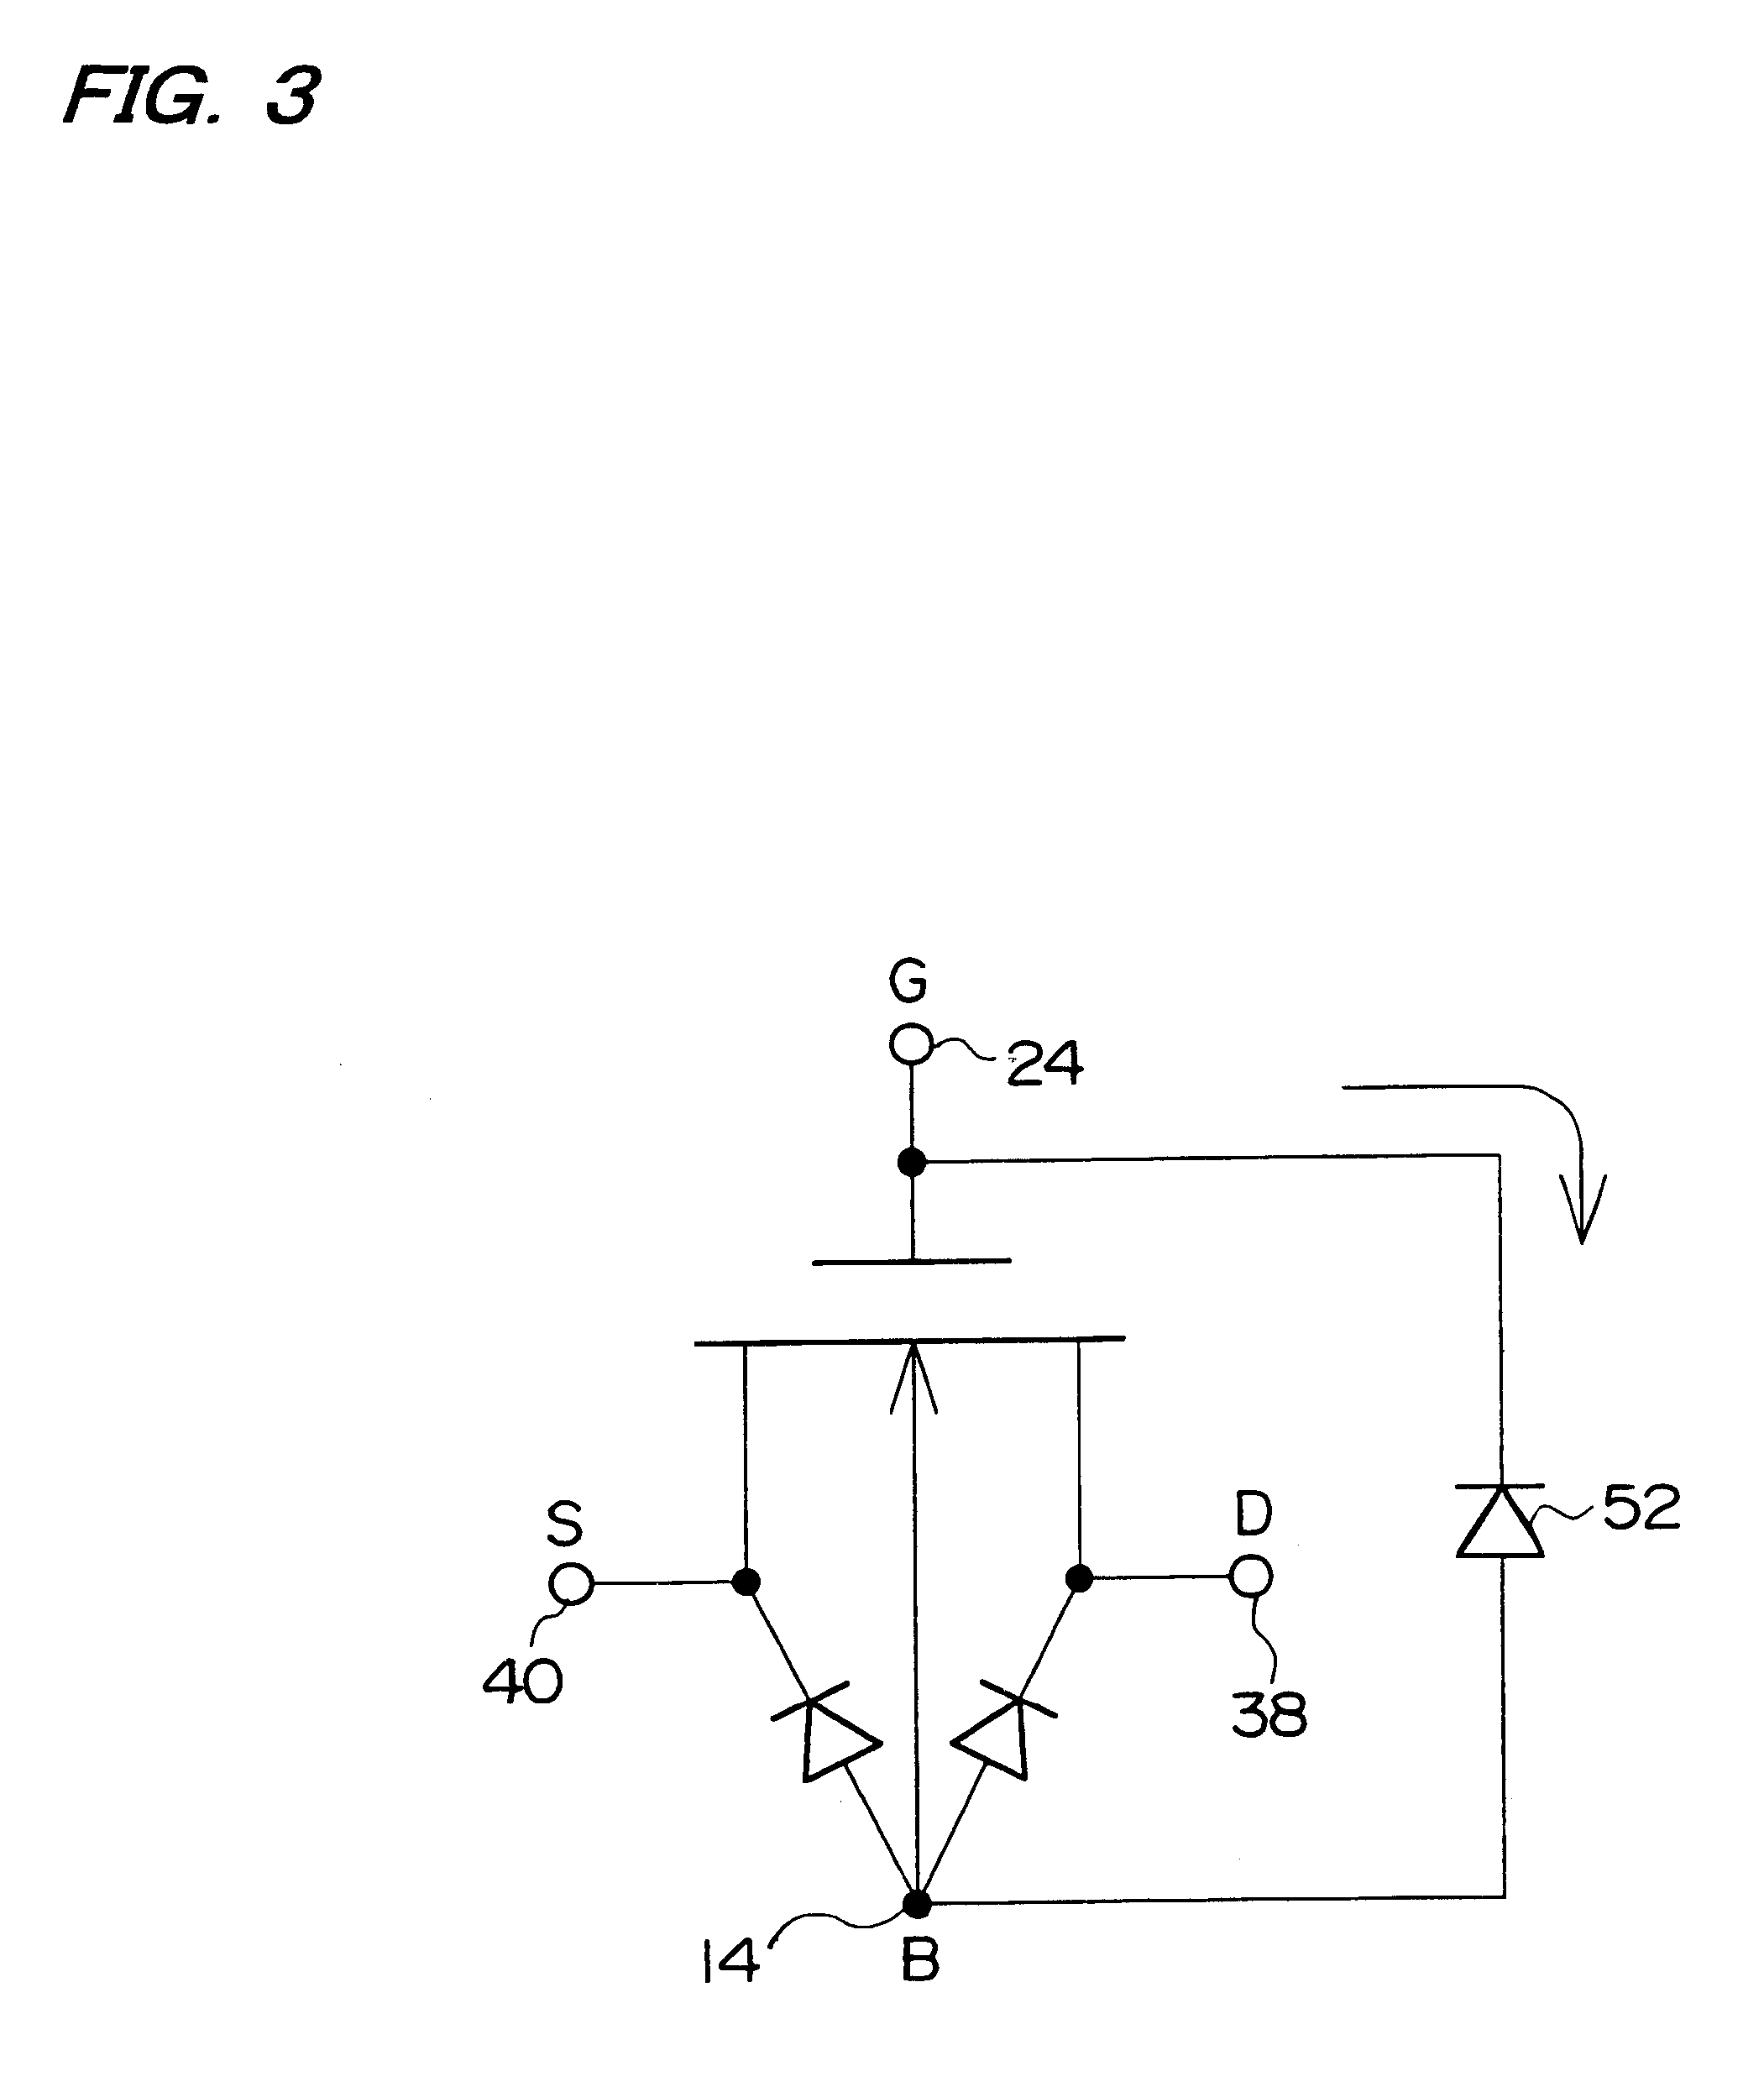 SOI-structure MIS field-effect transistor with gate contacting body region